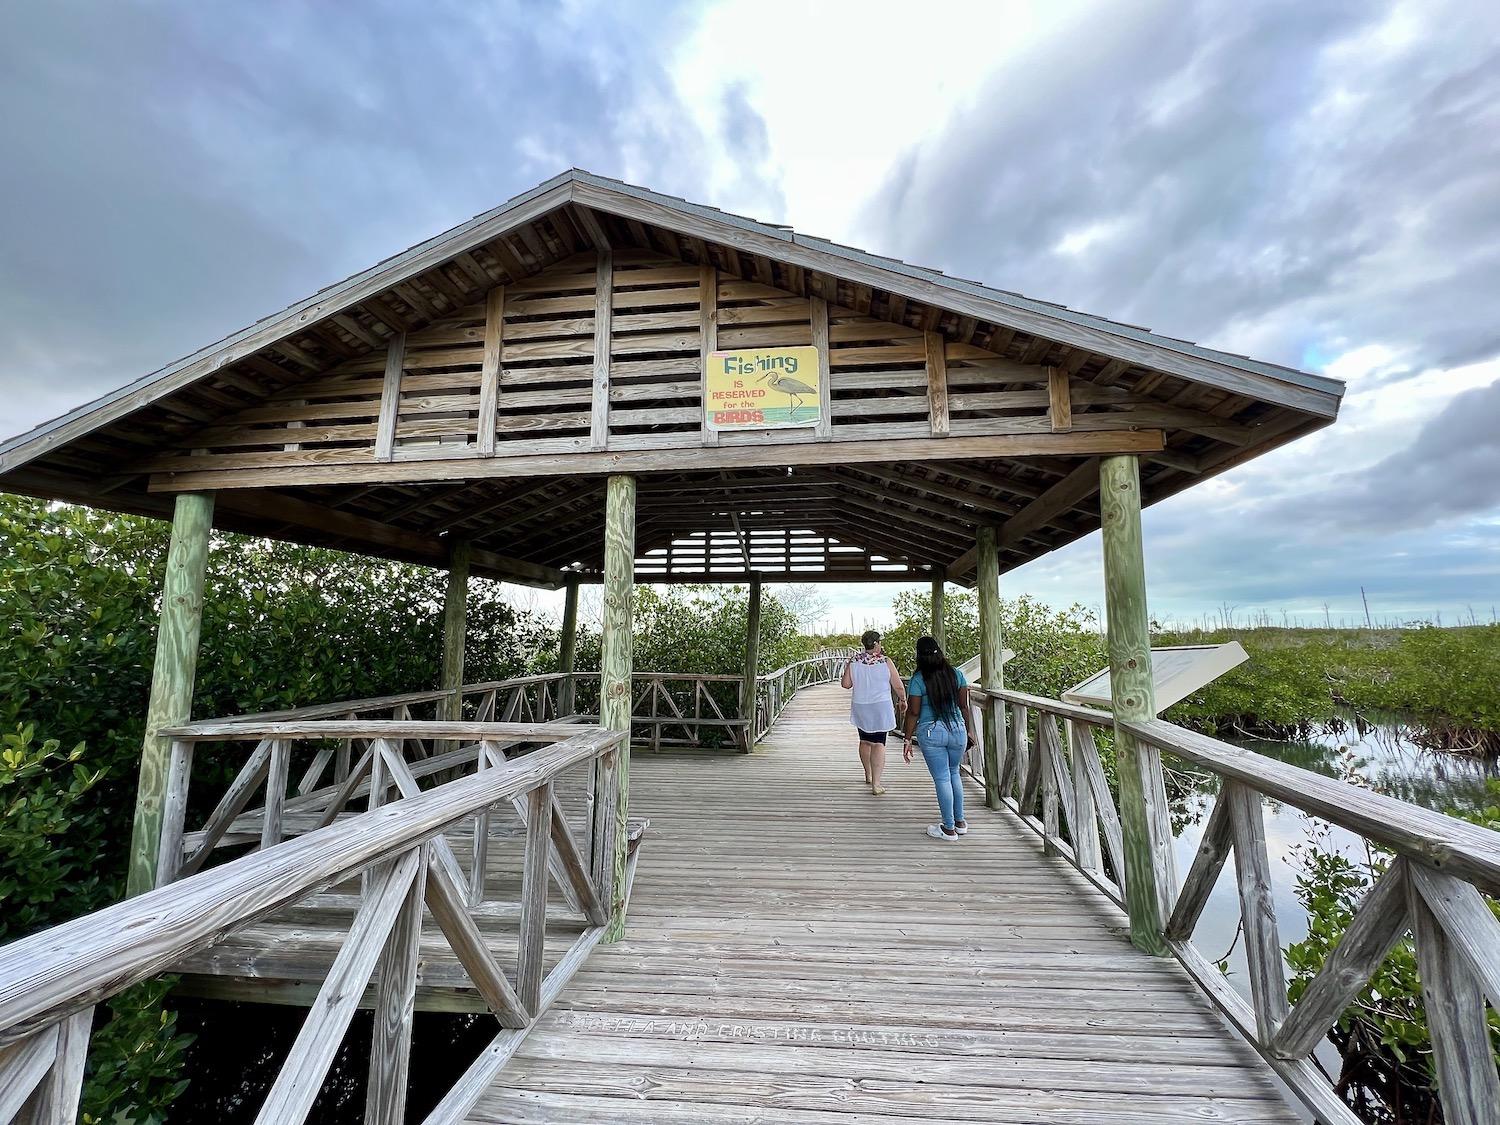 This part of the Lucayan National Park boardwalk meanders through Gold Rock Creek among mangroves.